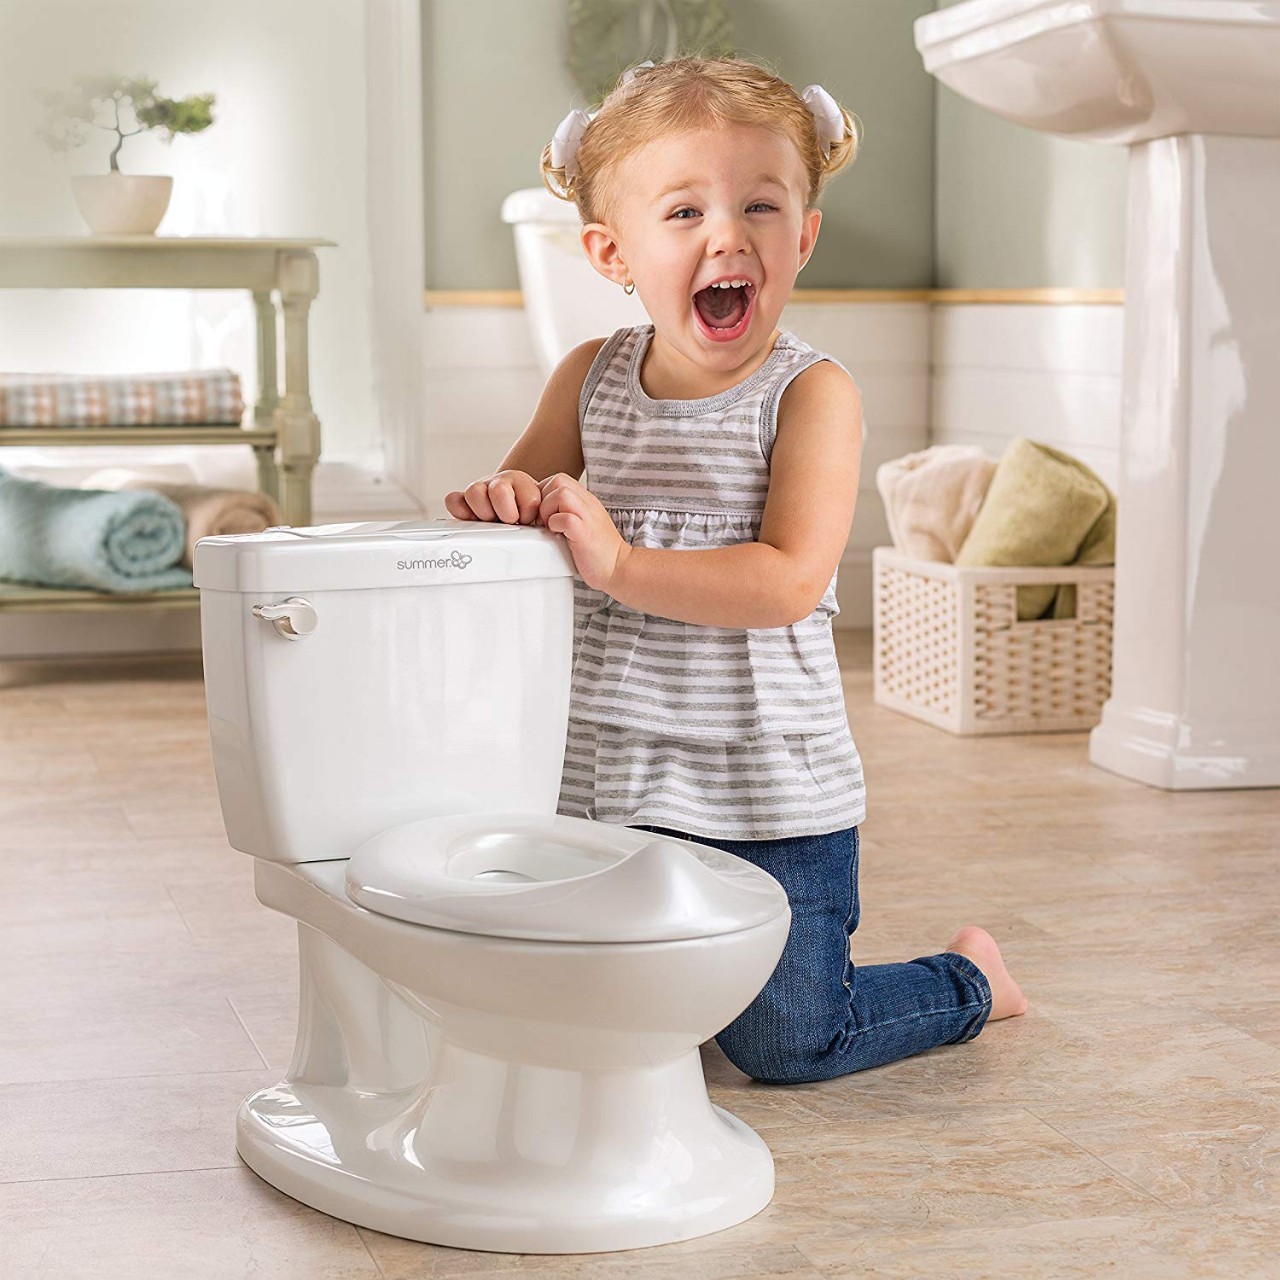 Summer My Size Potty, White – Realistic Potty Training Toilet Looks and Feels Like an Adult Toilet